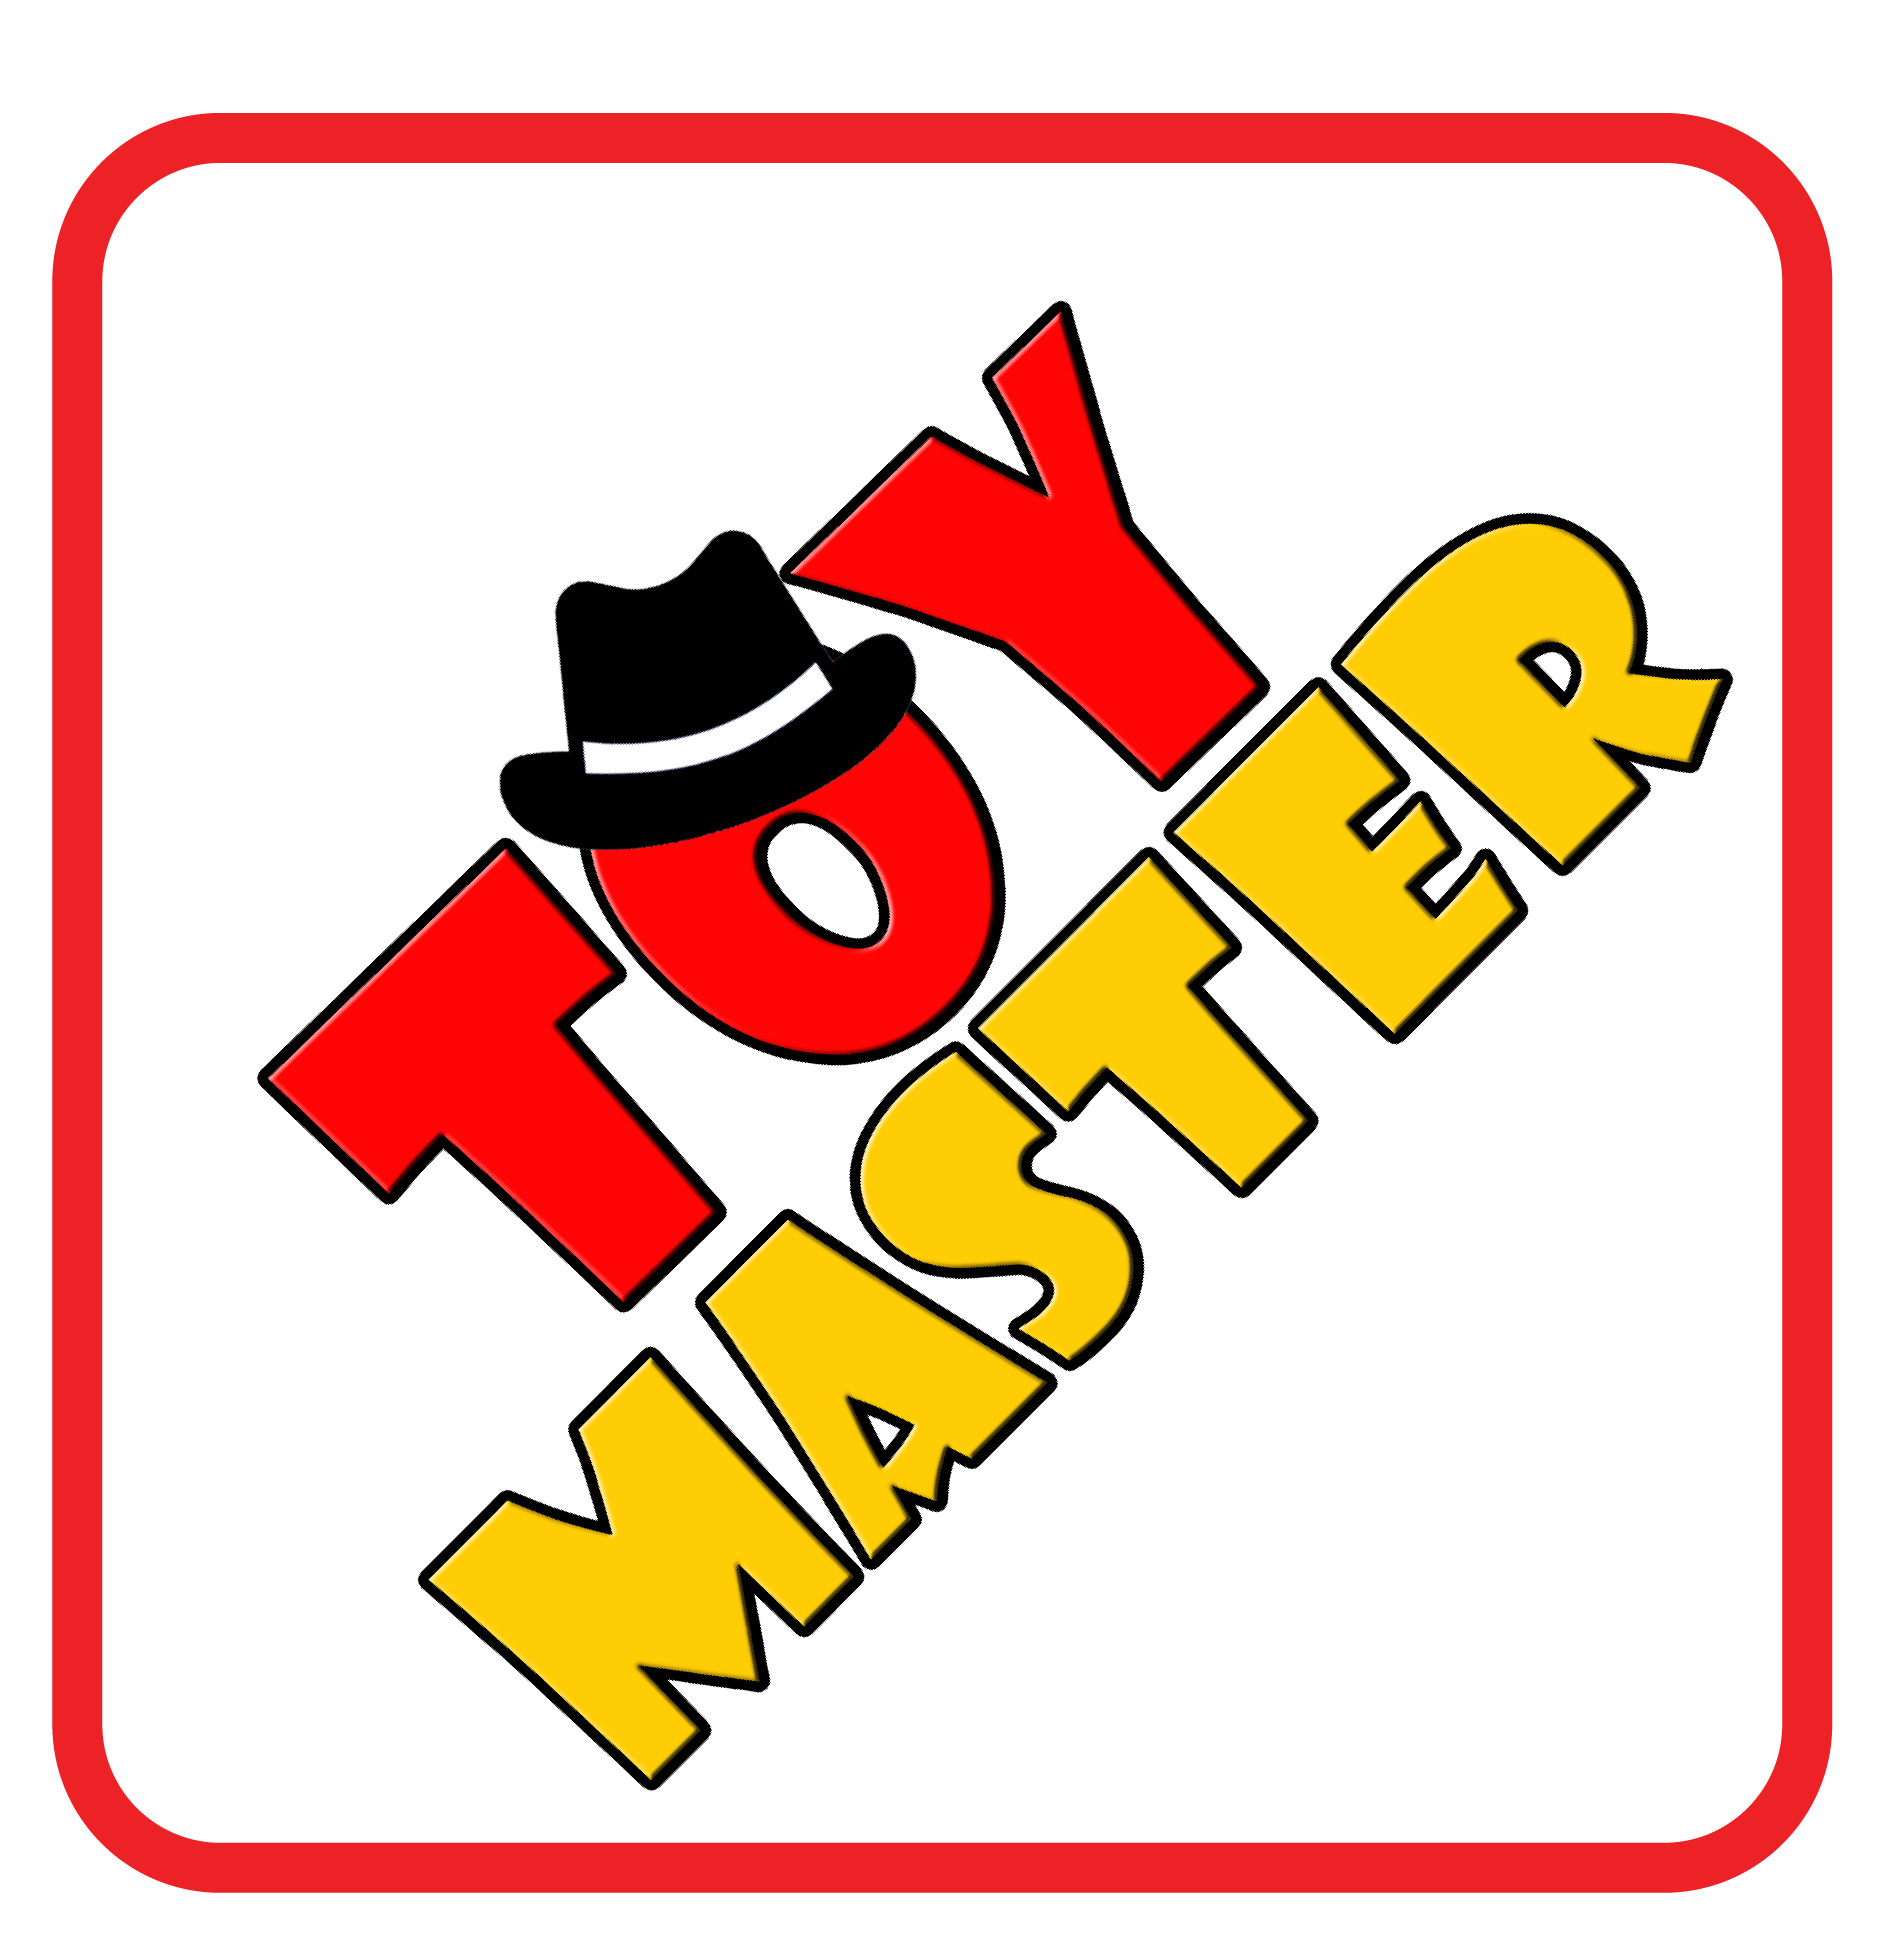 The Toymaster